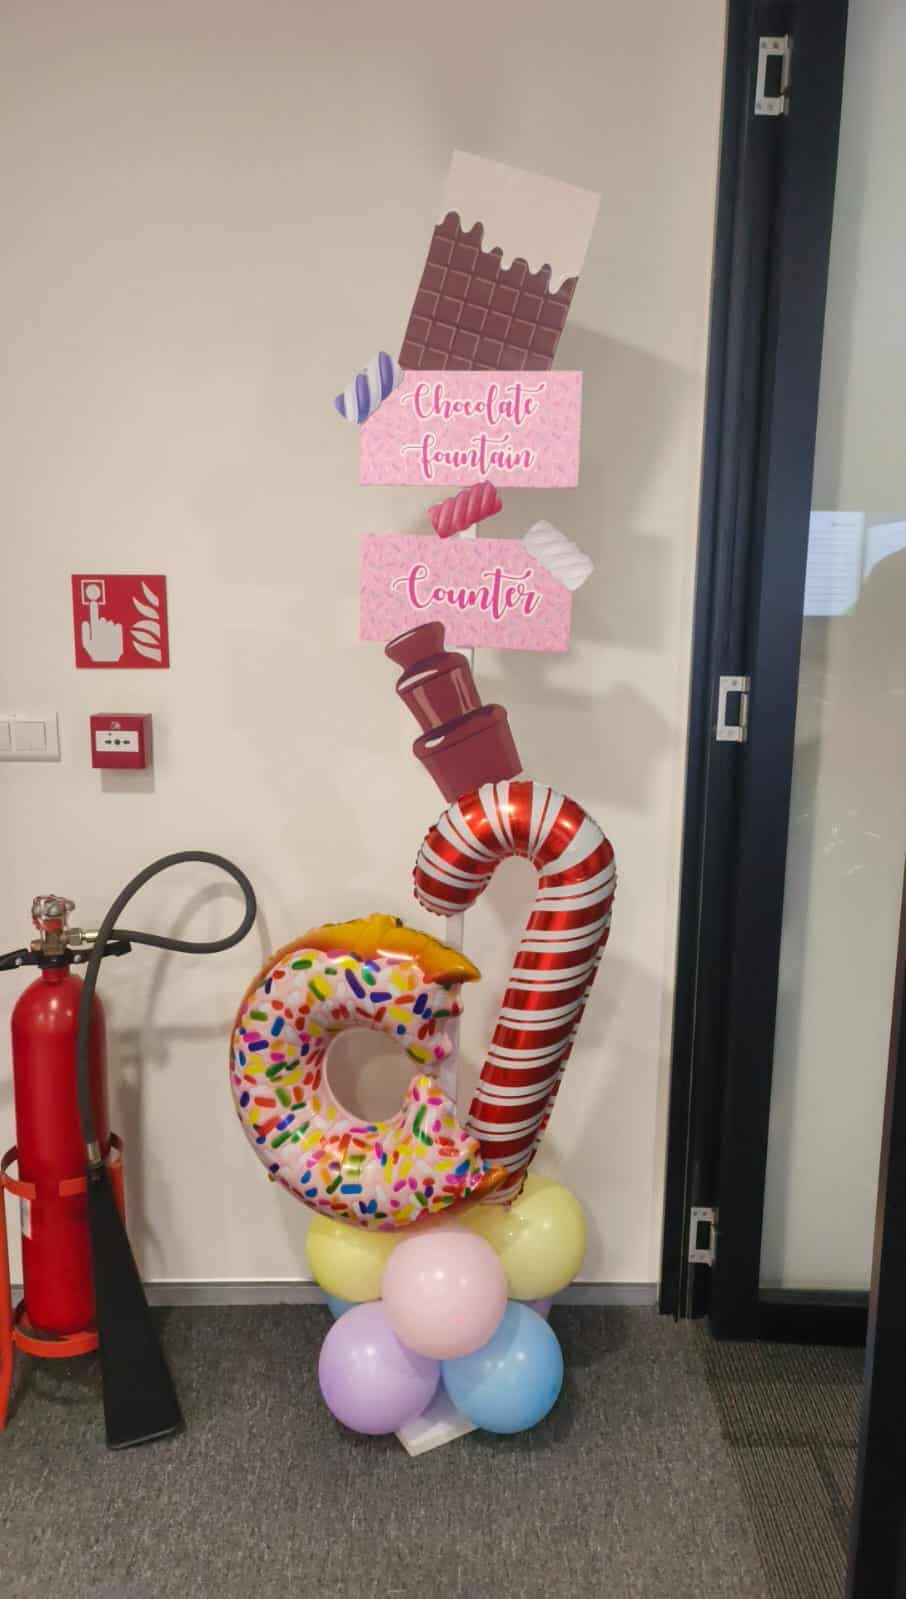 candyland theme decoration with activity banners.